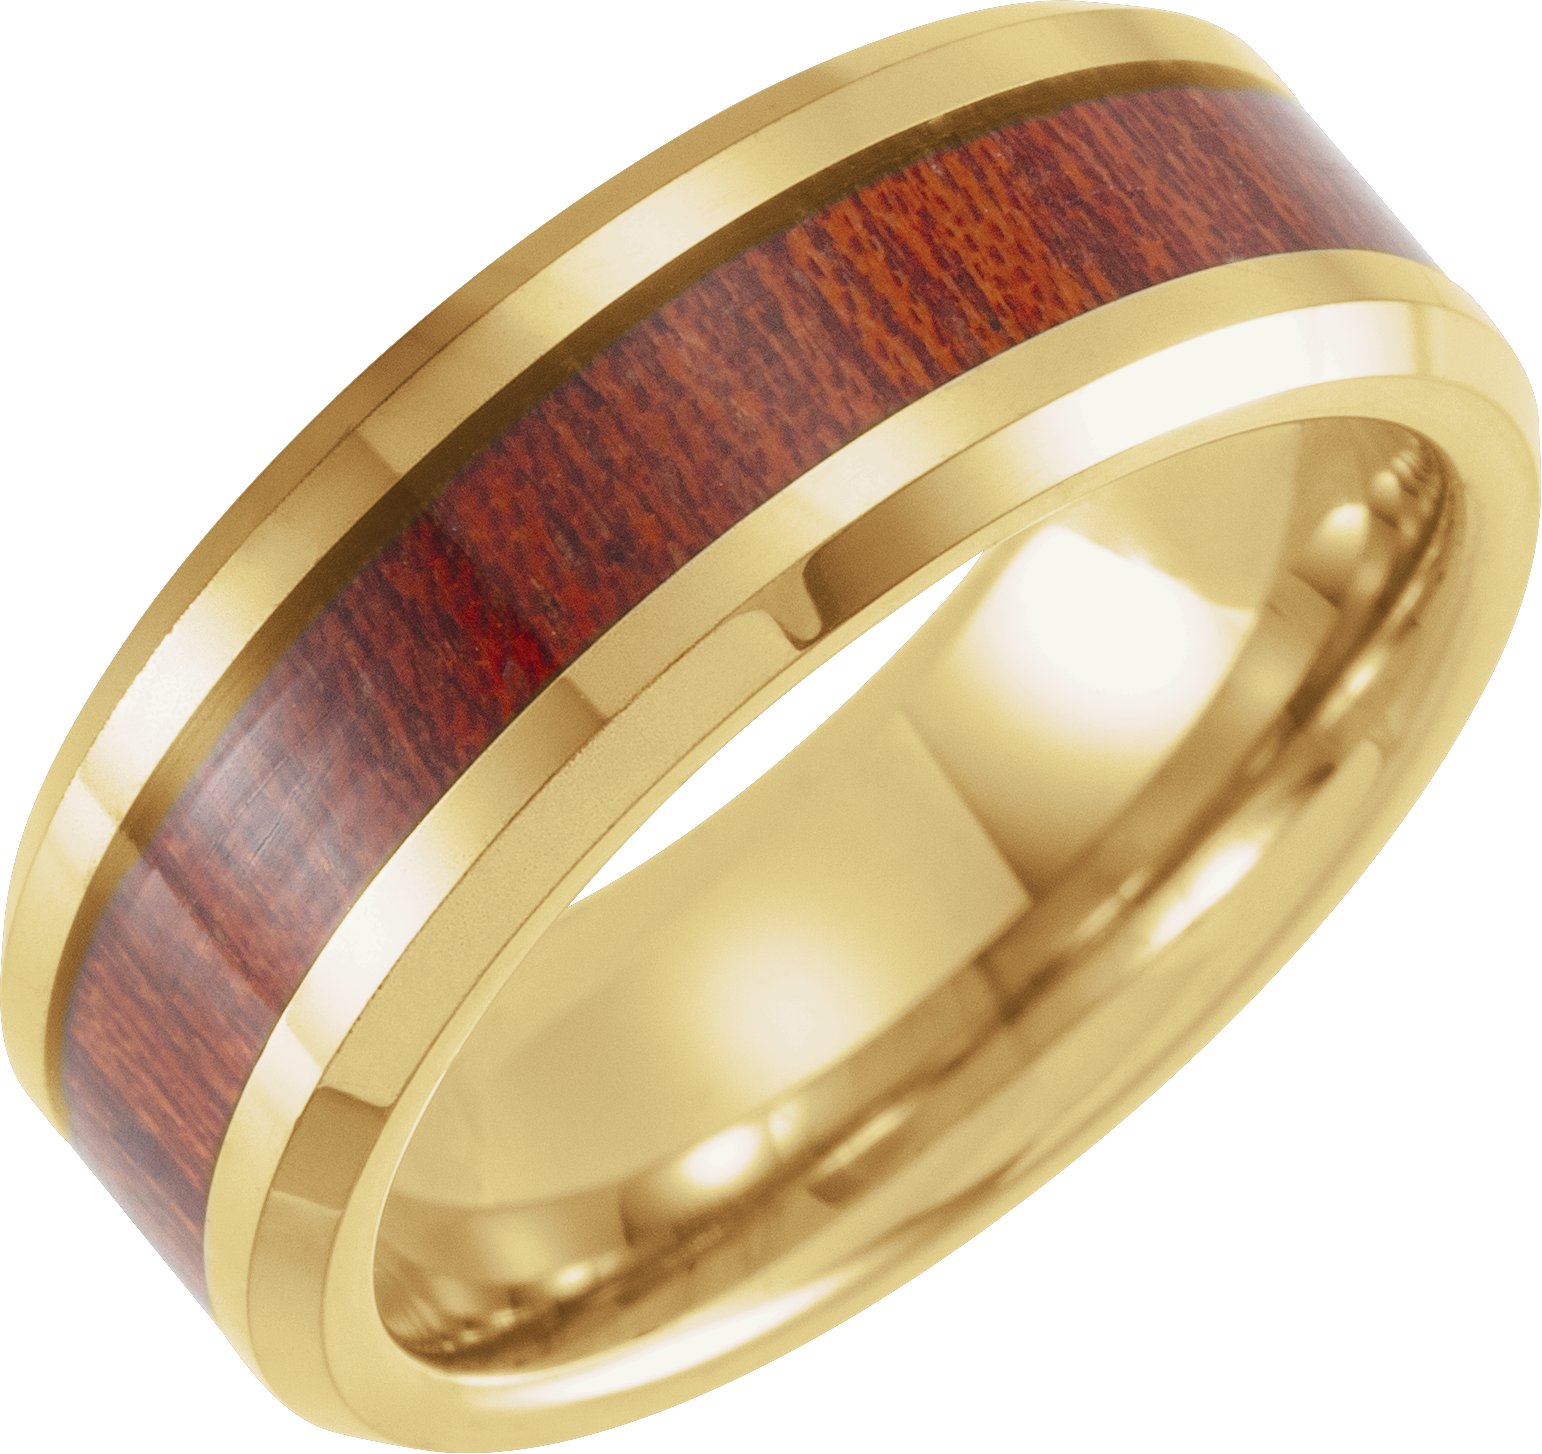 18K Yellow Gold PVD Tungsten 8 mm Beveled Band with Walnut Wood Inlay Size 10